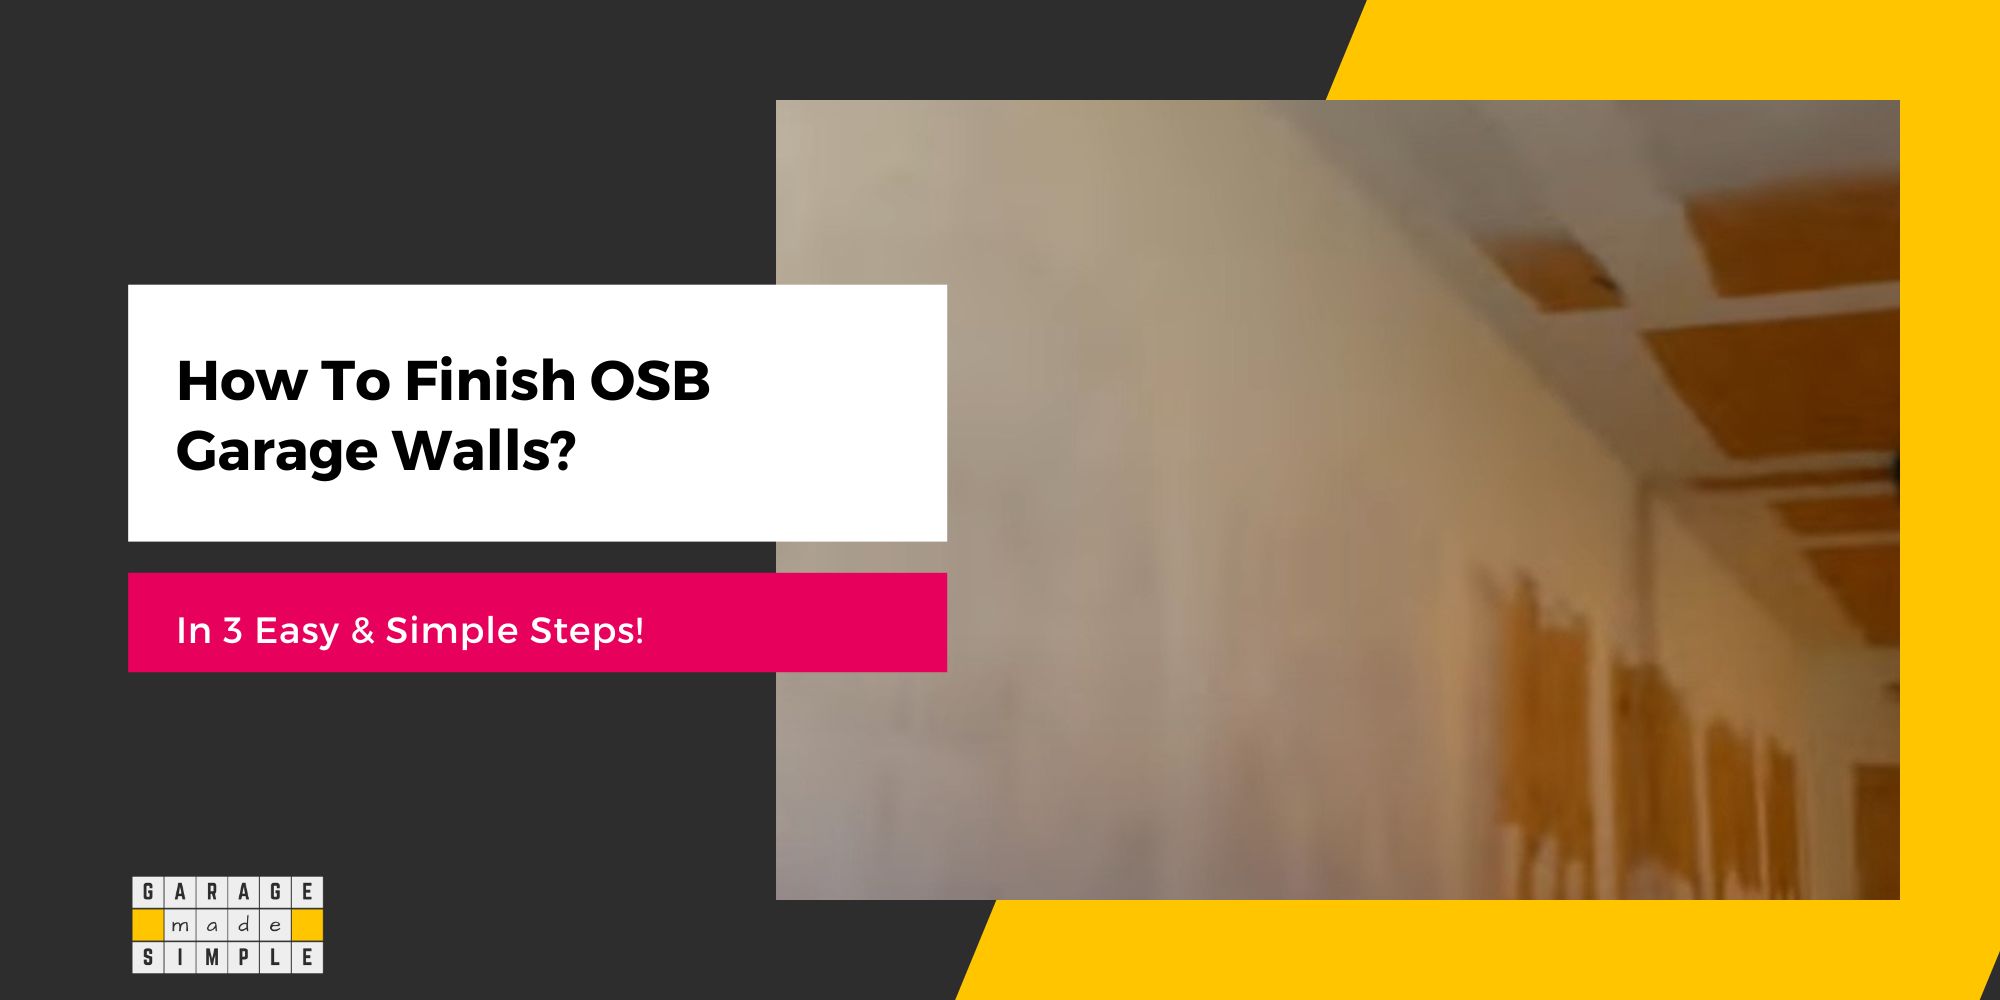 How To Finish OSB Garage Walls In 3 Easy & Simple Steps!